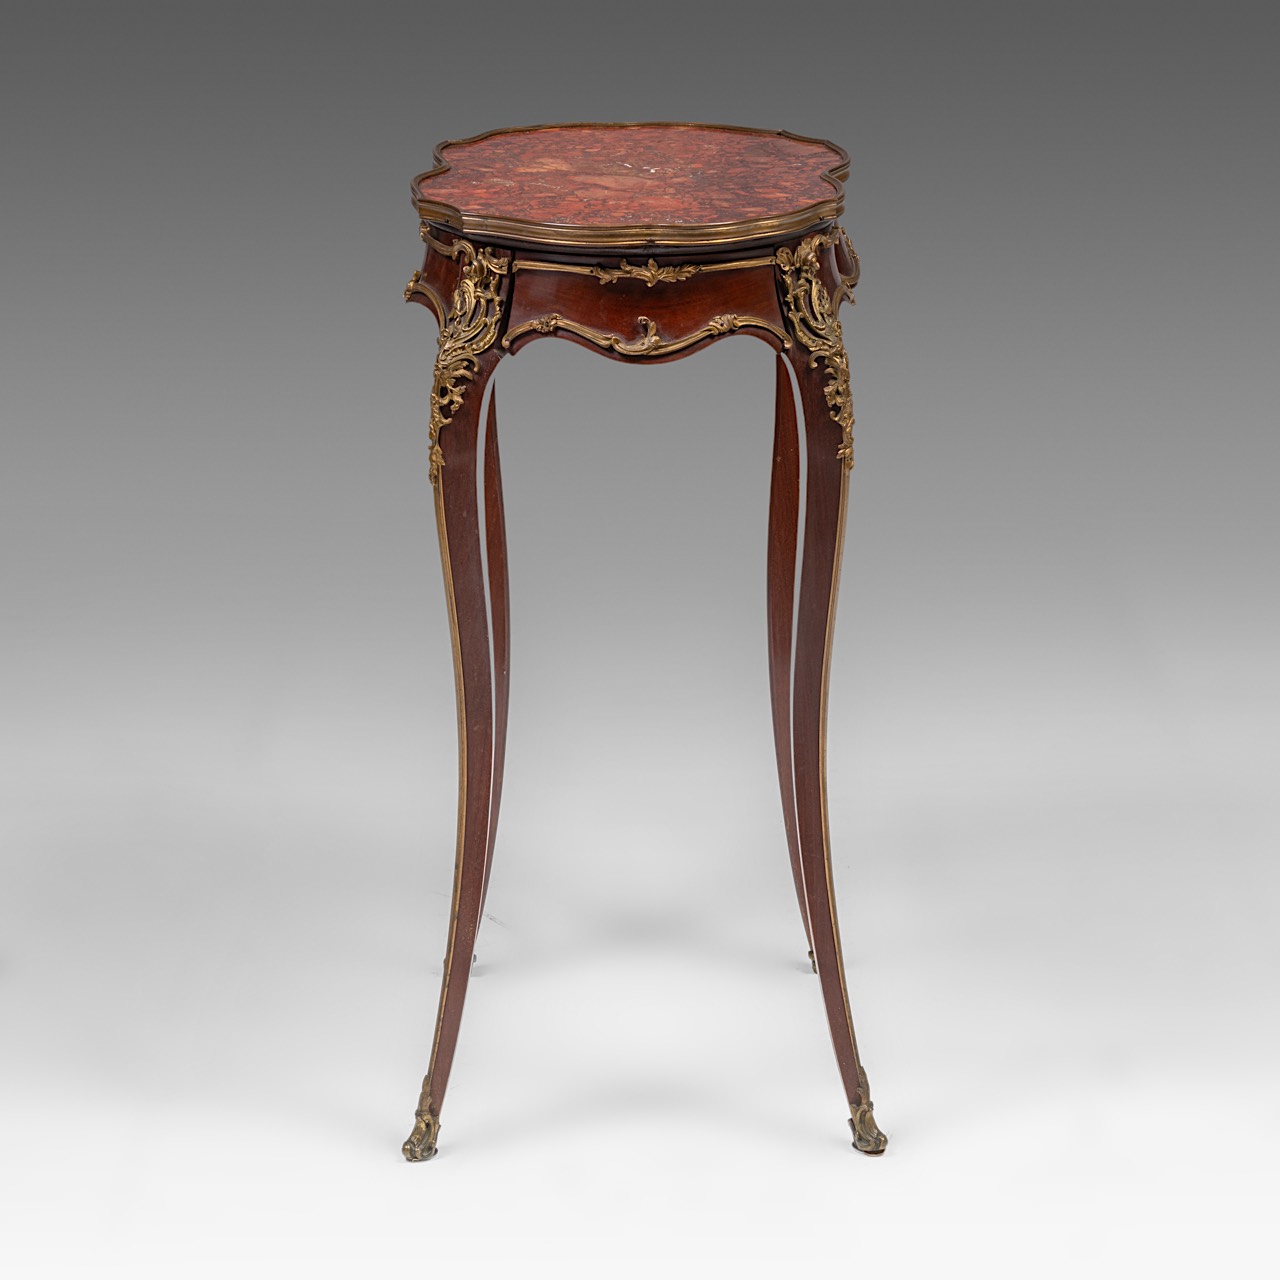 A mahogany marble-topped Louis XV (1723-1774) occasional table with gilt bronze mounts, H 77,5 cm - - Image 3 of 9